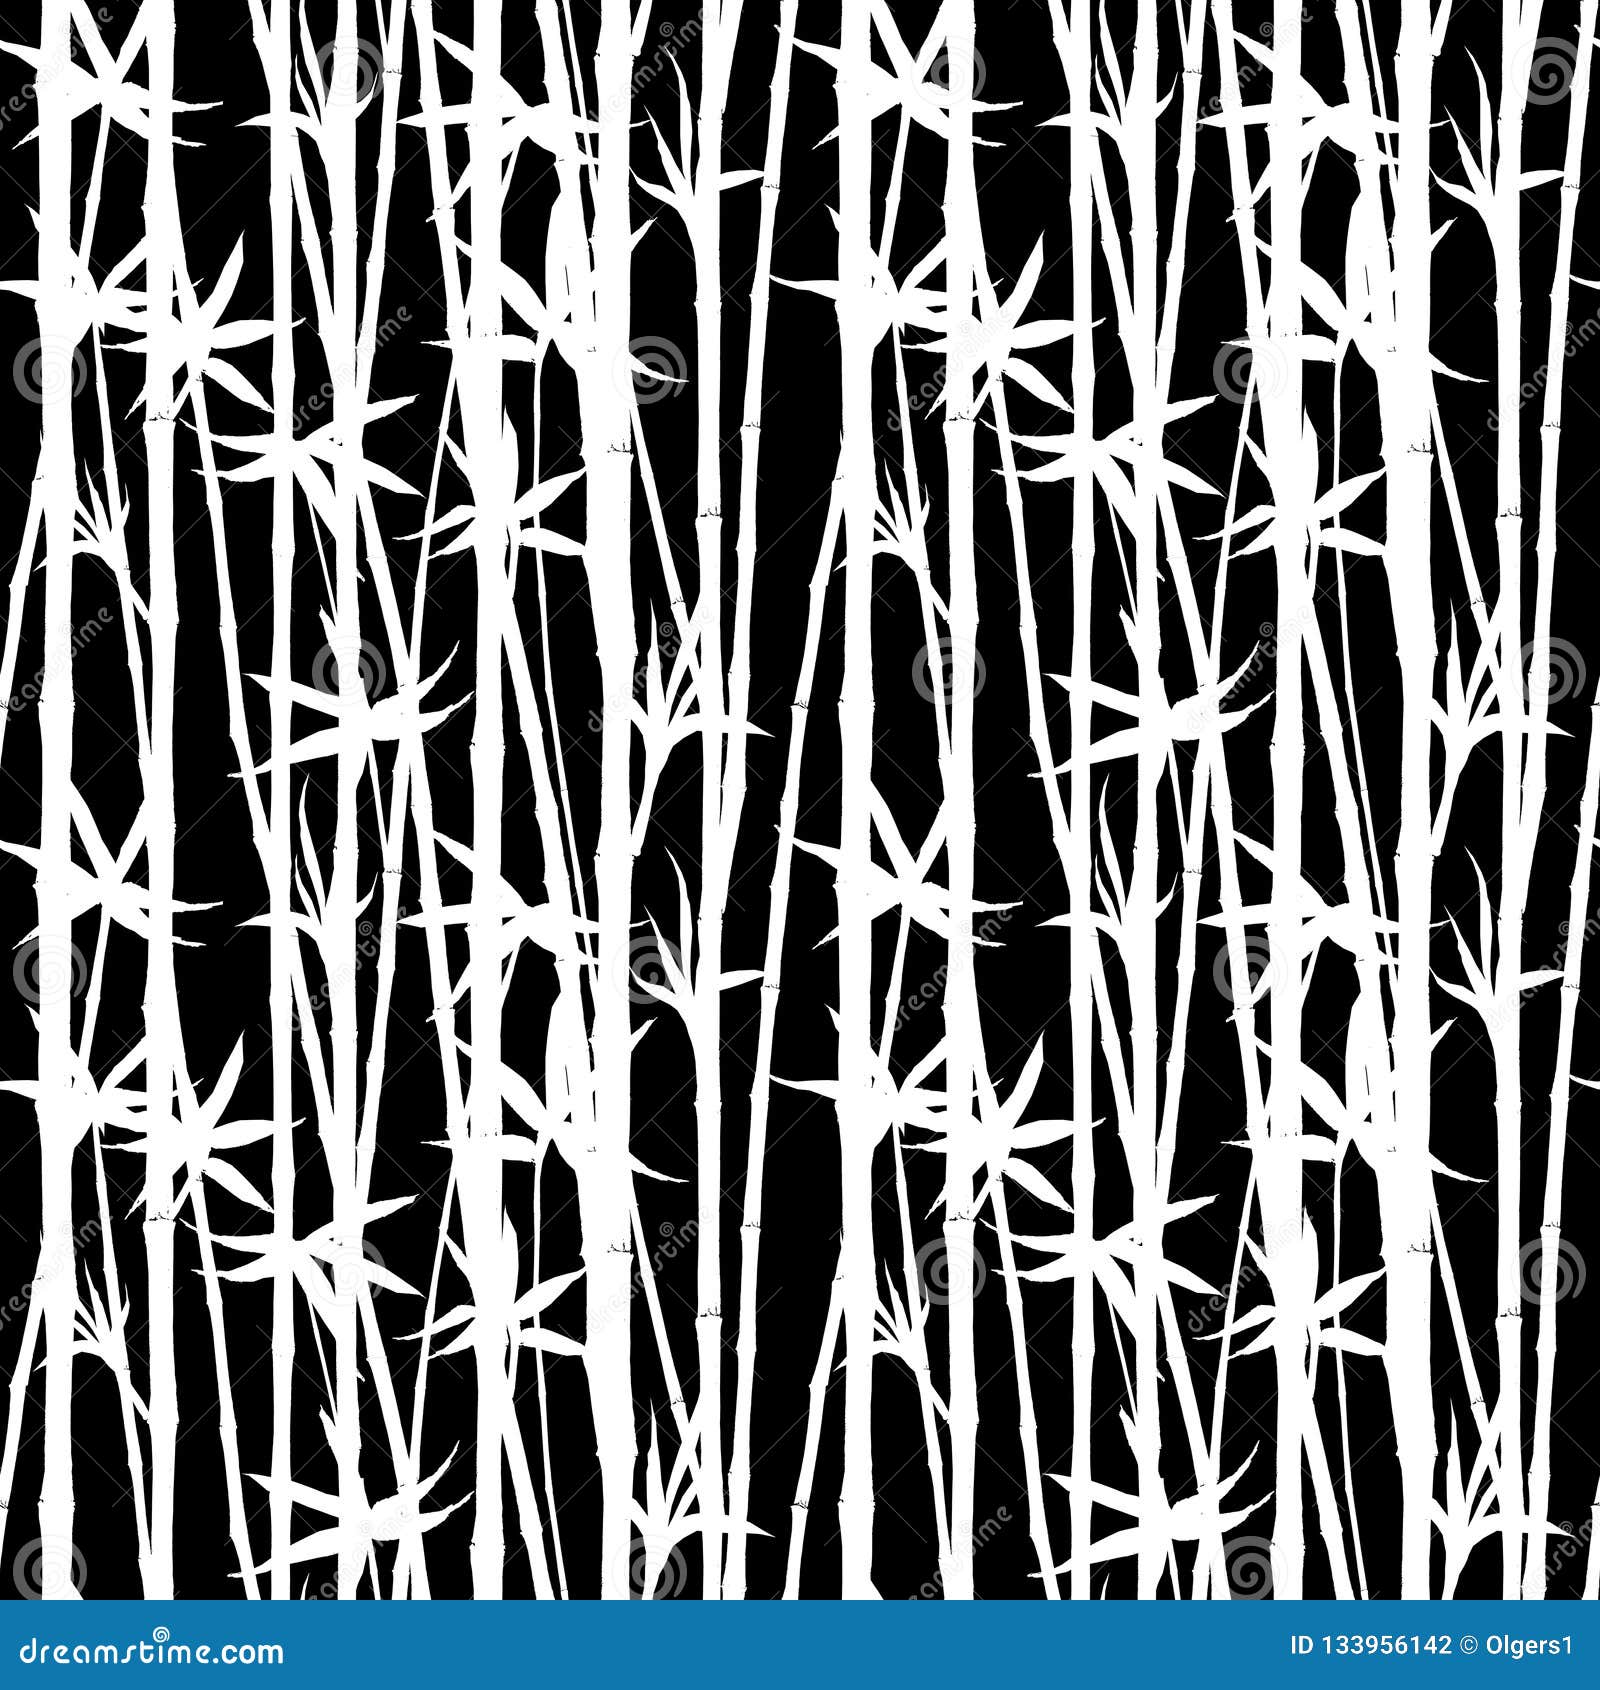 Bamboo Watercolor Stems and Leaves Seamless Pattern on Black Background  Stock Illustration - Illustration of fashion, beauty: 133956142